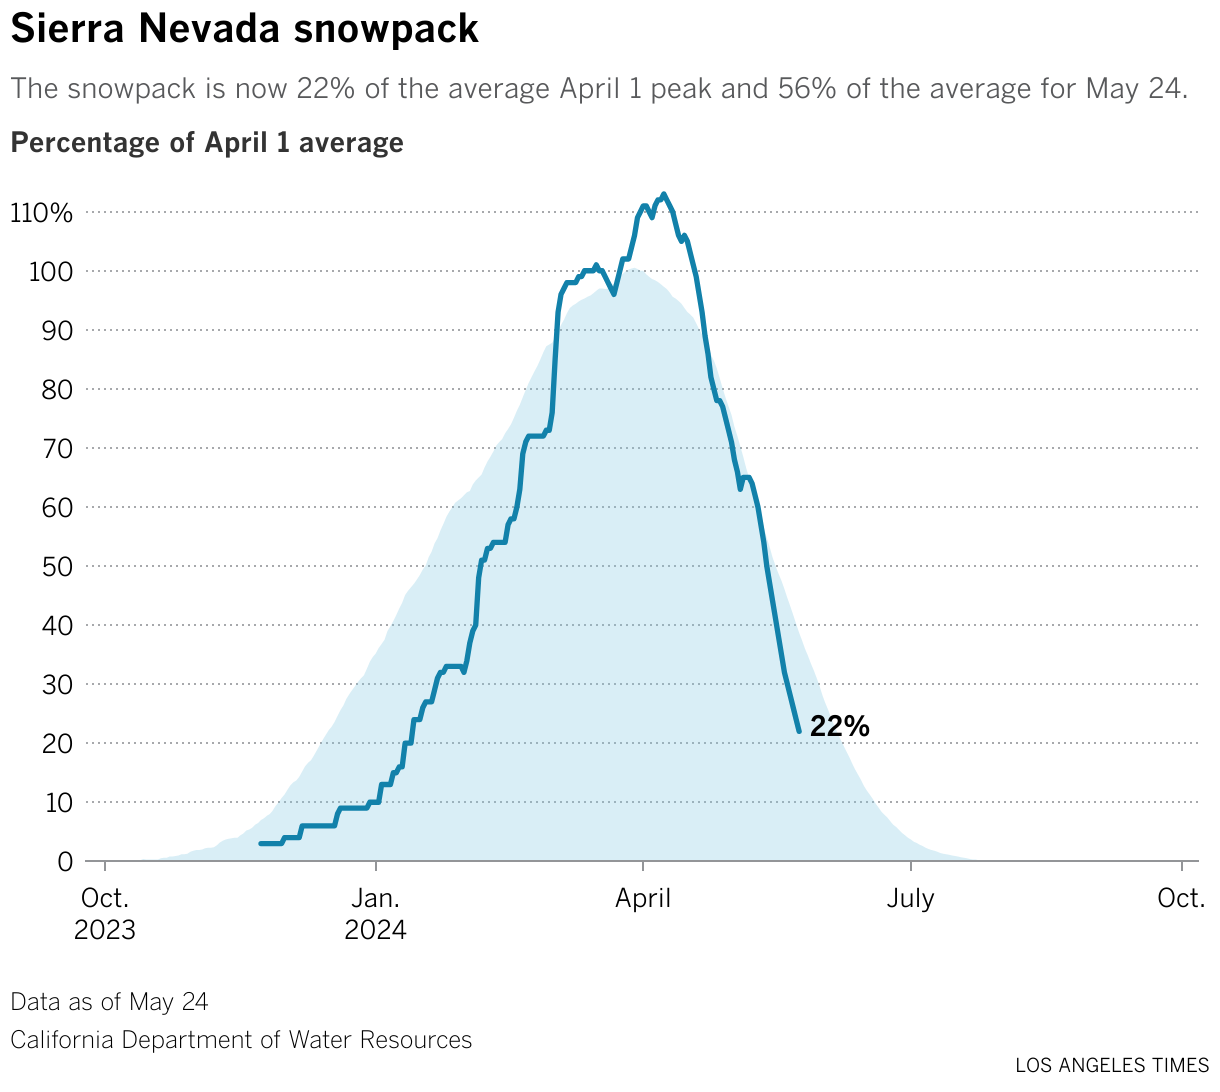 Line chart shows the Sierra snowpack level as a percentage of the average peak.